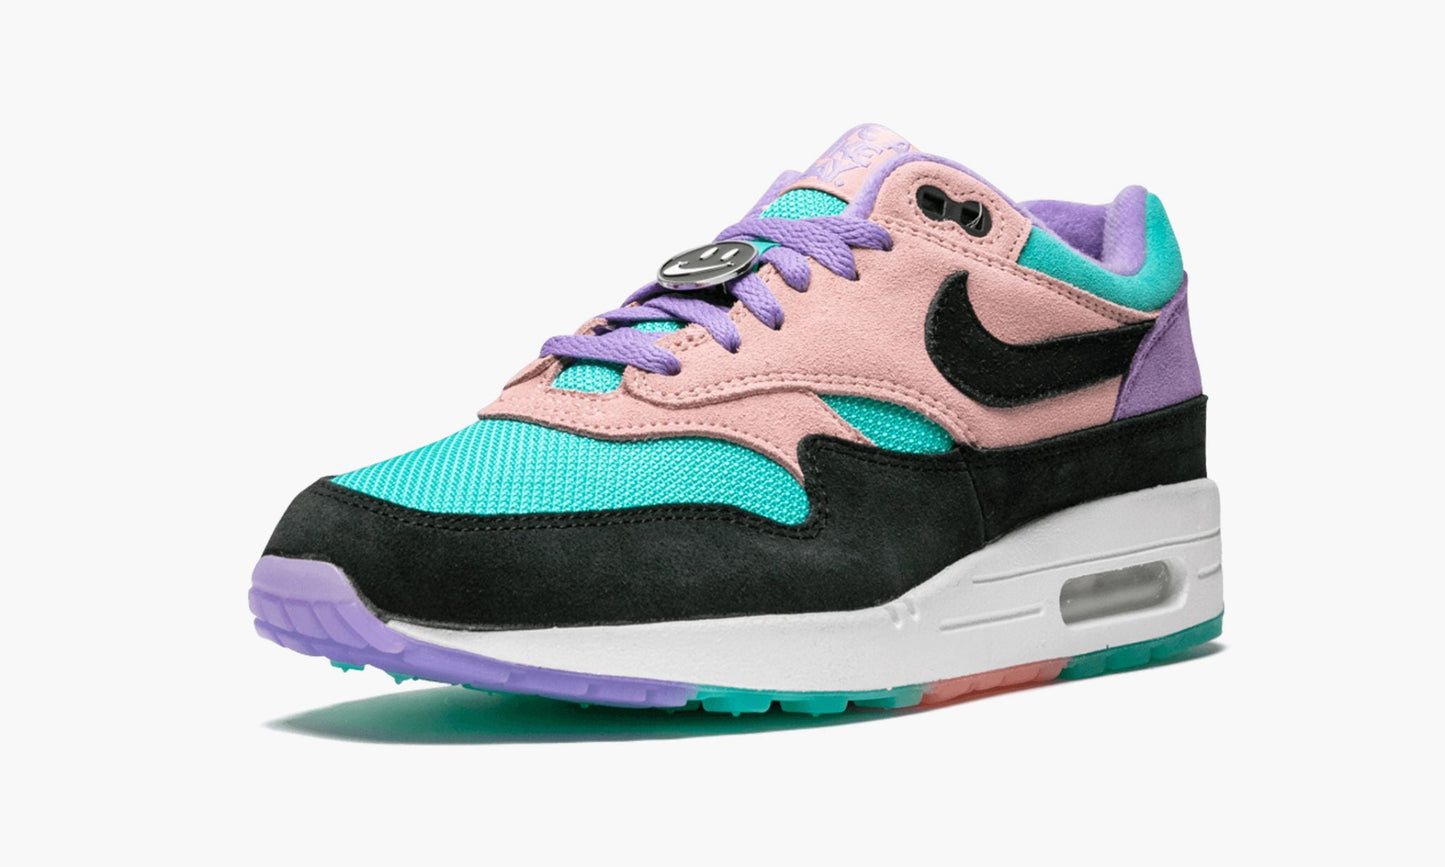 Air Max 1 ND "Have A Nike Day"